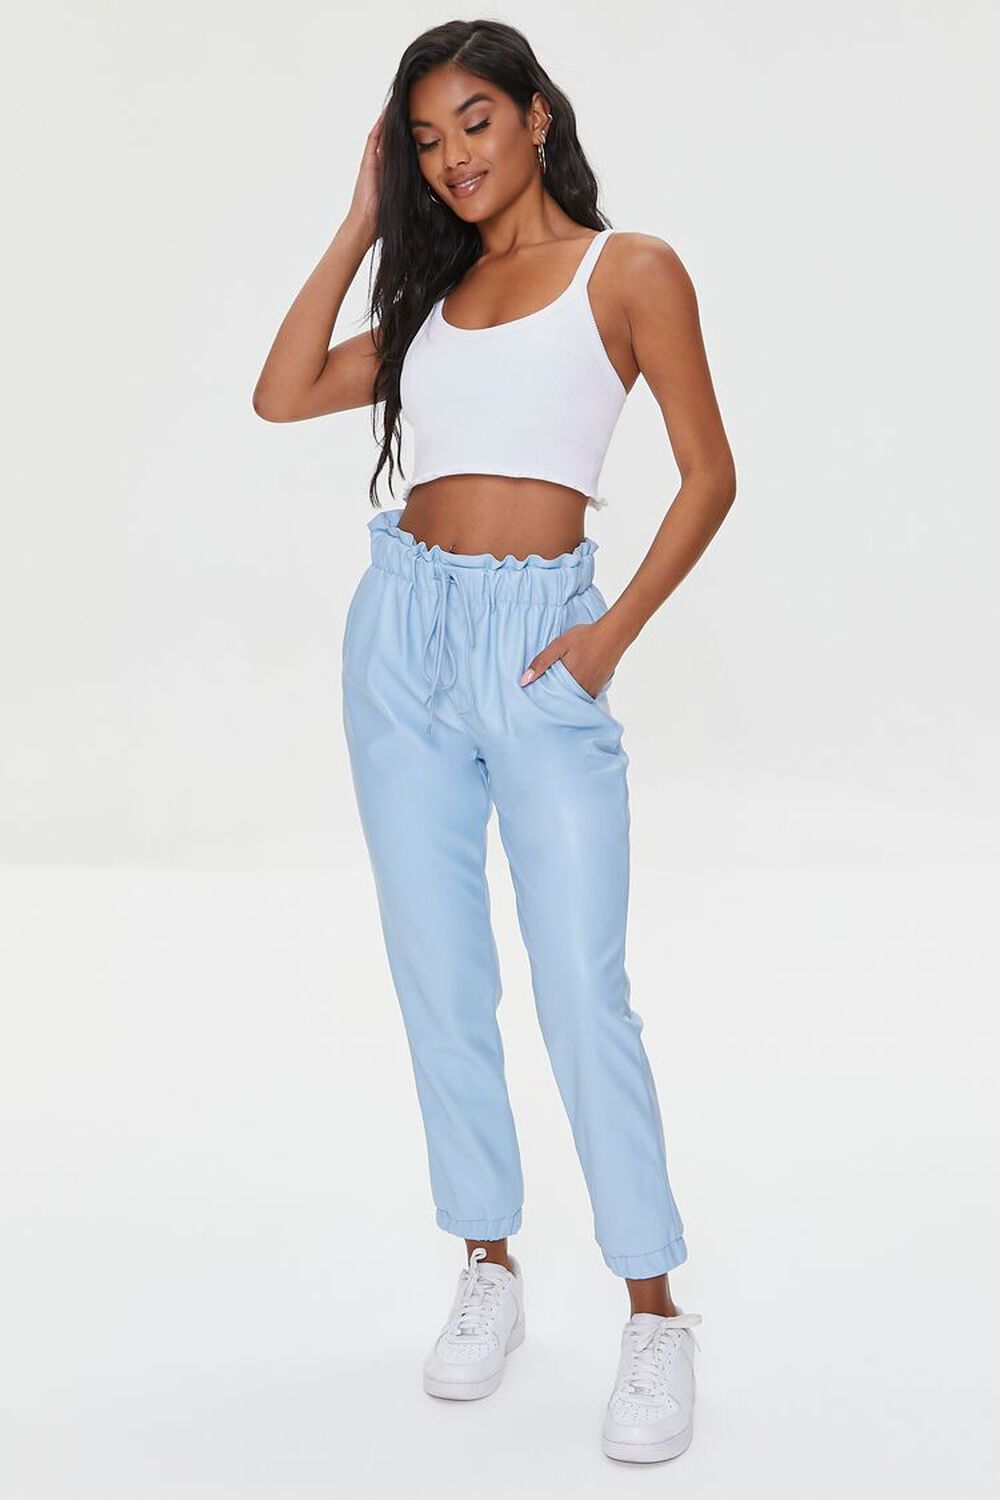 LIGHT BLUE Faux Leather Paperbag Joggers, image 1